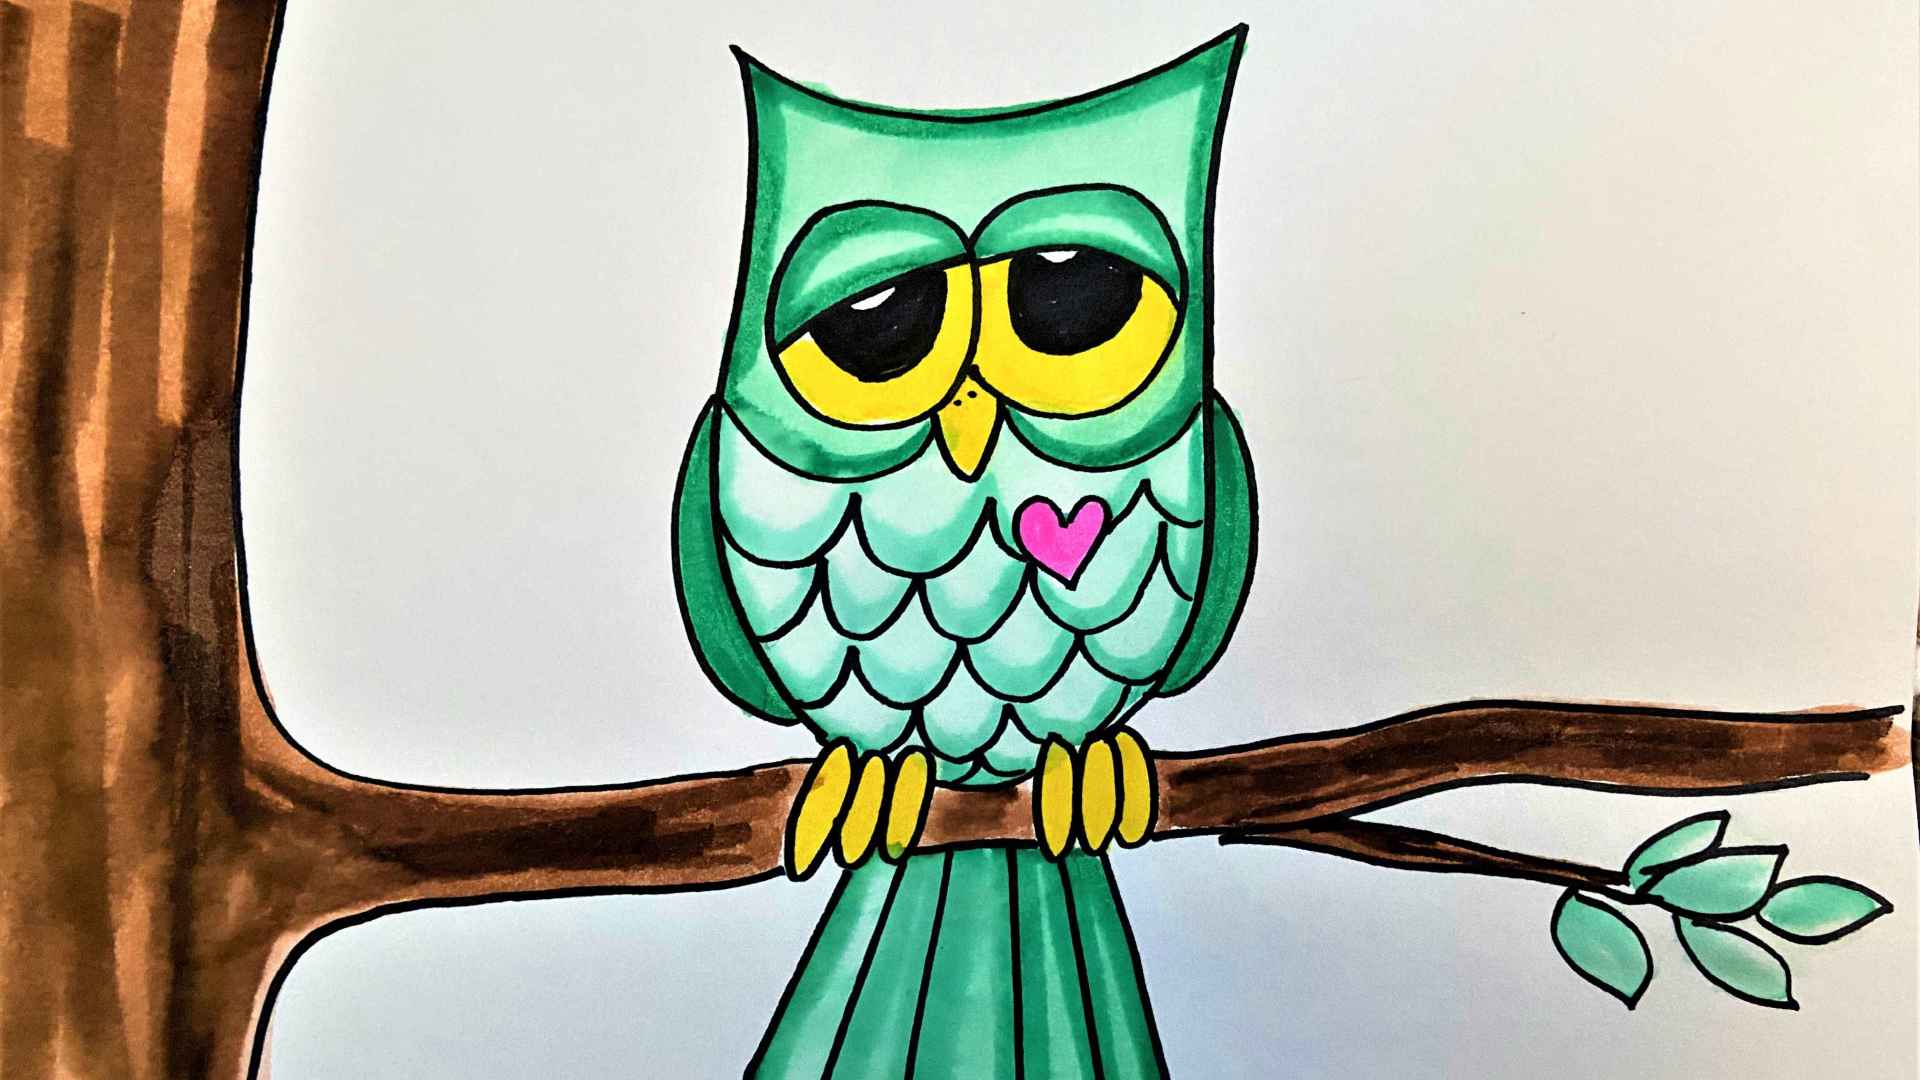 How to Draw an Owl - Step by Step Instructions - Easy Peasy and Fun